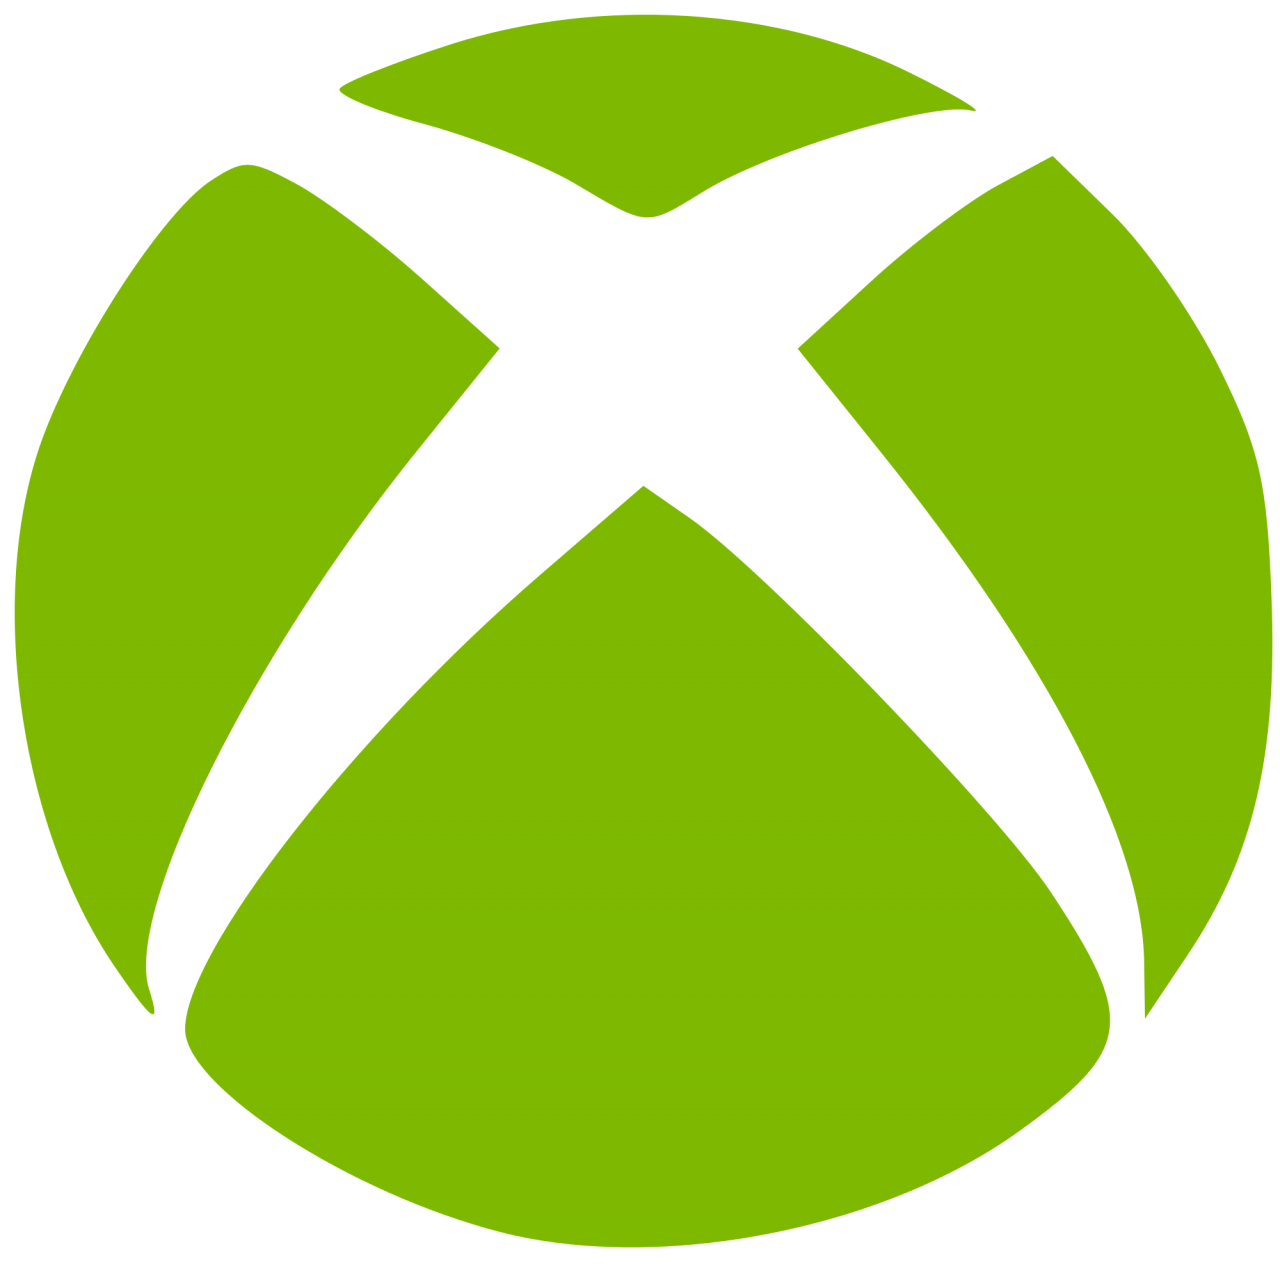 Xbox Logo PNG Image - PurePNG | Free transparent CC0 PNG Image Library